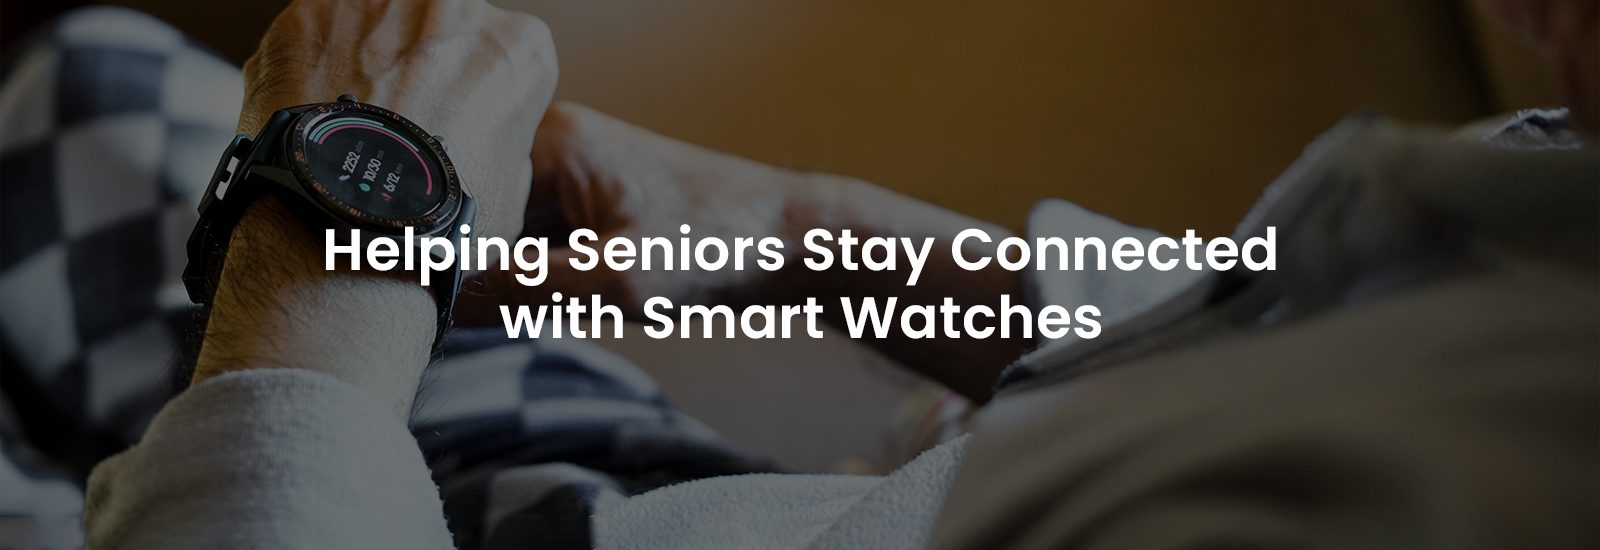 Helping Seniors Stay Connected with Smart Watches | Banner Image